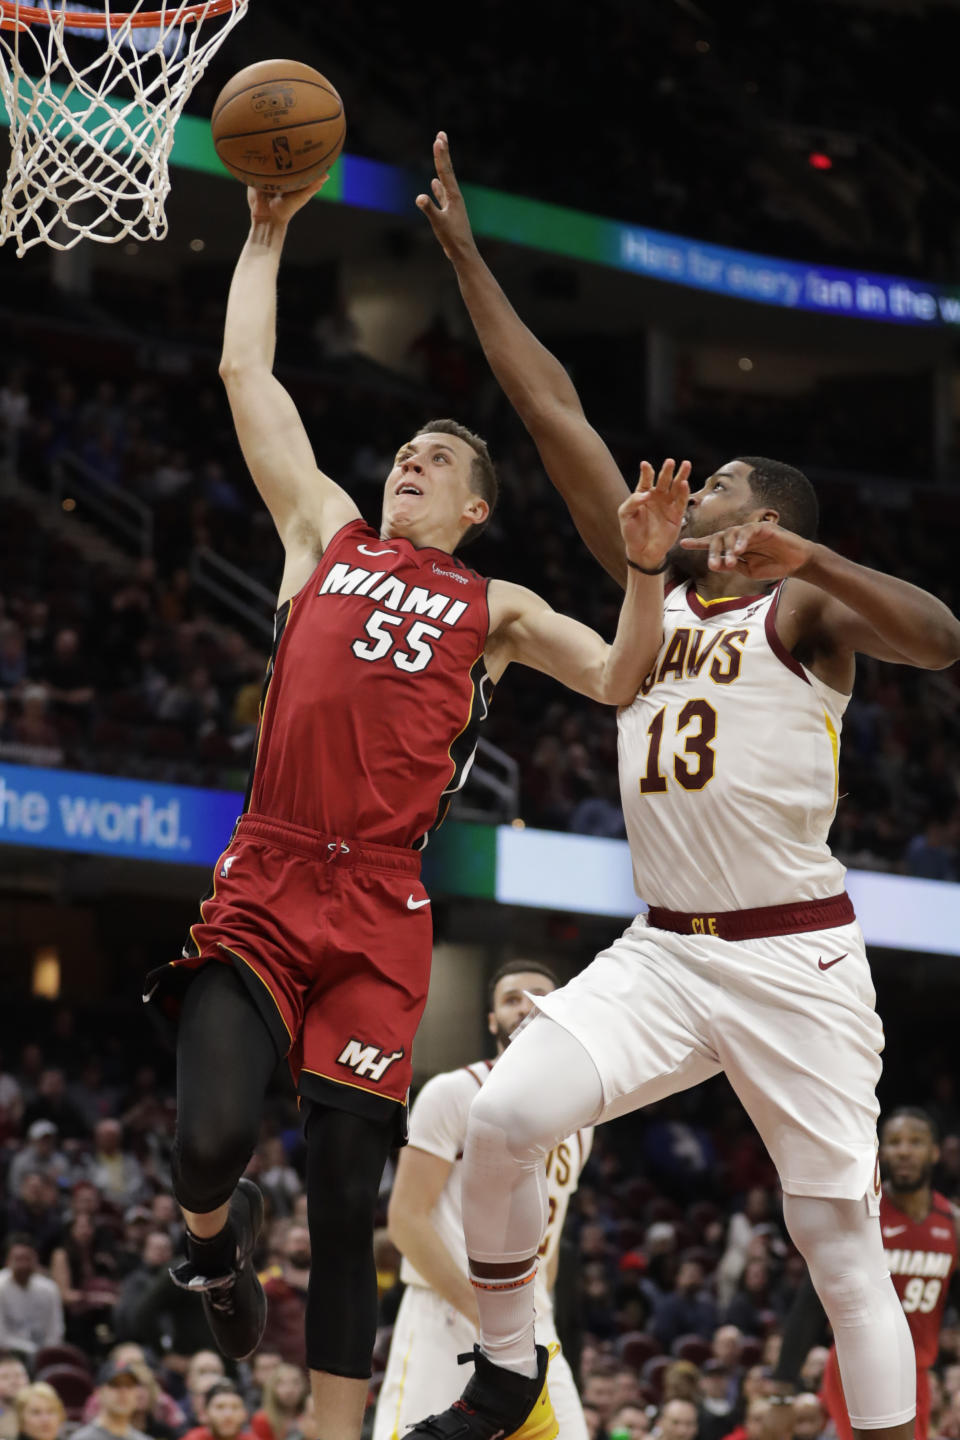 Miami Heat's Duncan Robinson (55) drives against Cleveland Cavaliers' Tristan Thompson (13) in overtime of an NBA basketball game, Monday, Feb. 24, 2020, in Cleveland. (AP Photo/Tony Dejak)